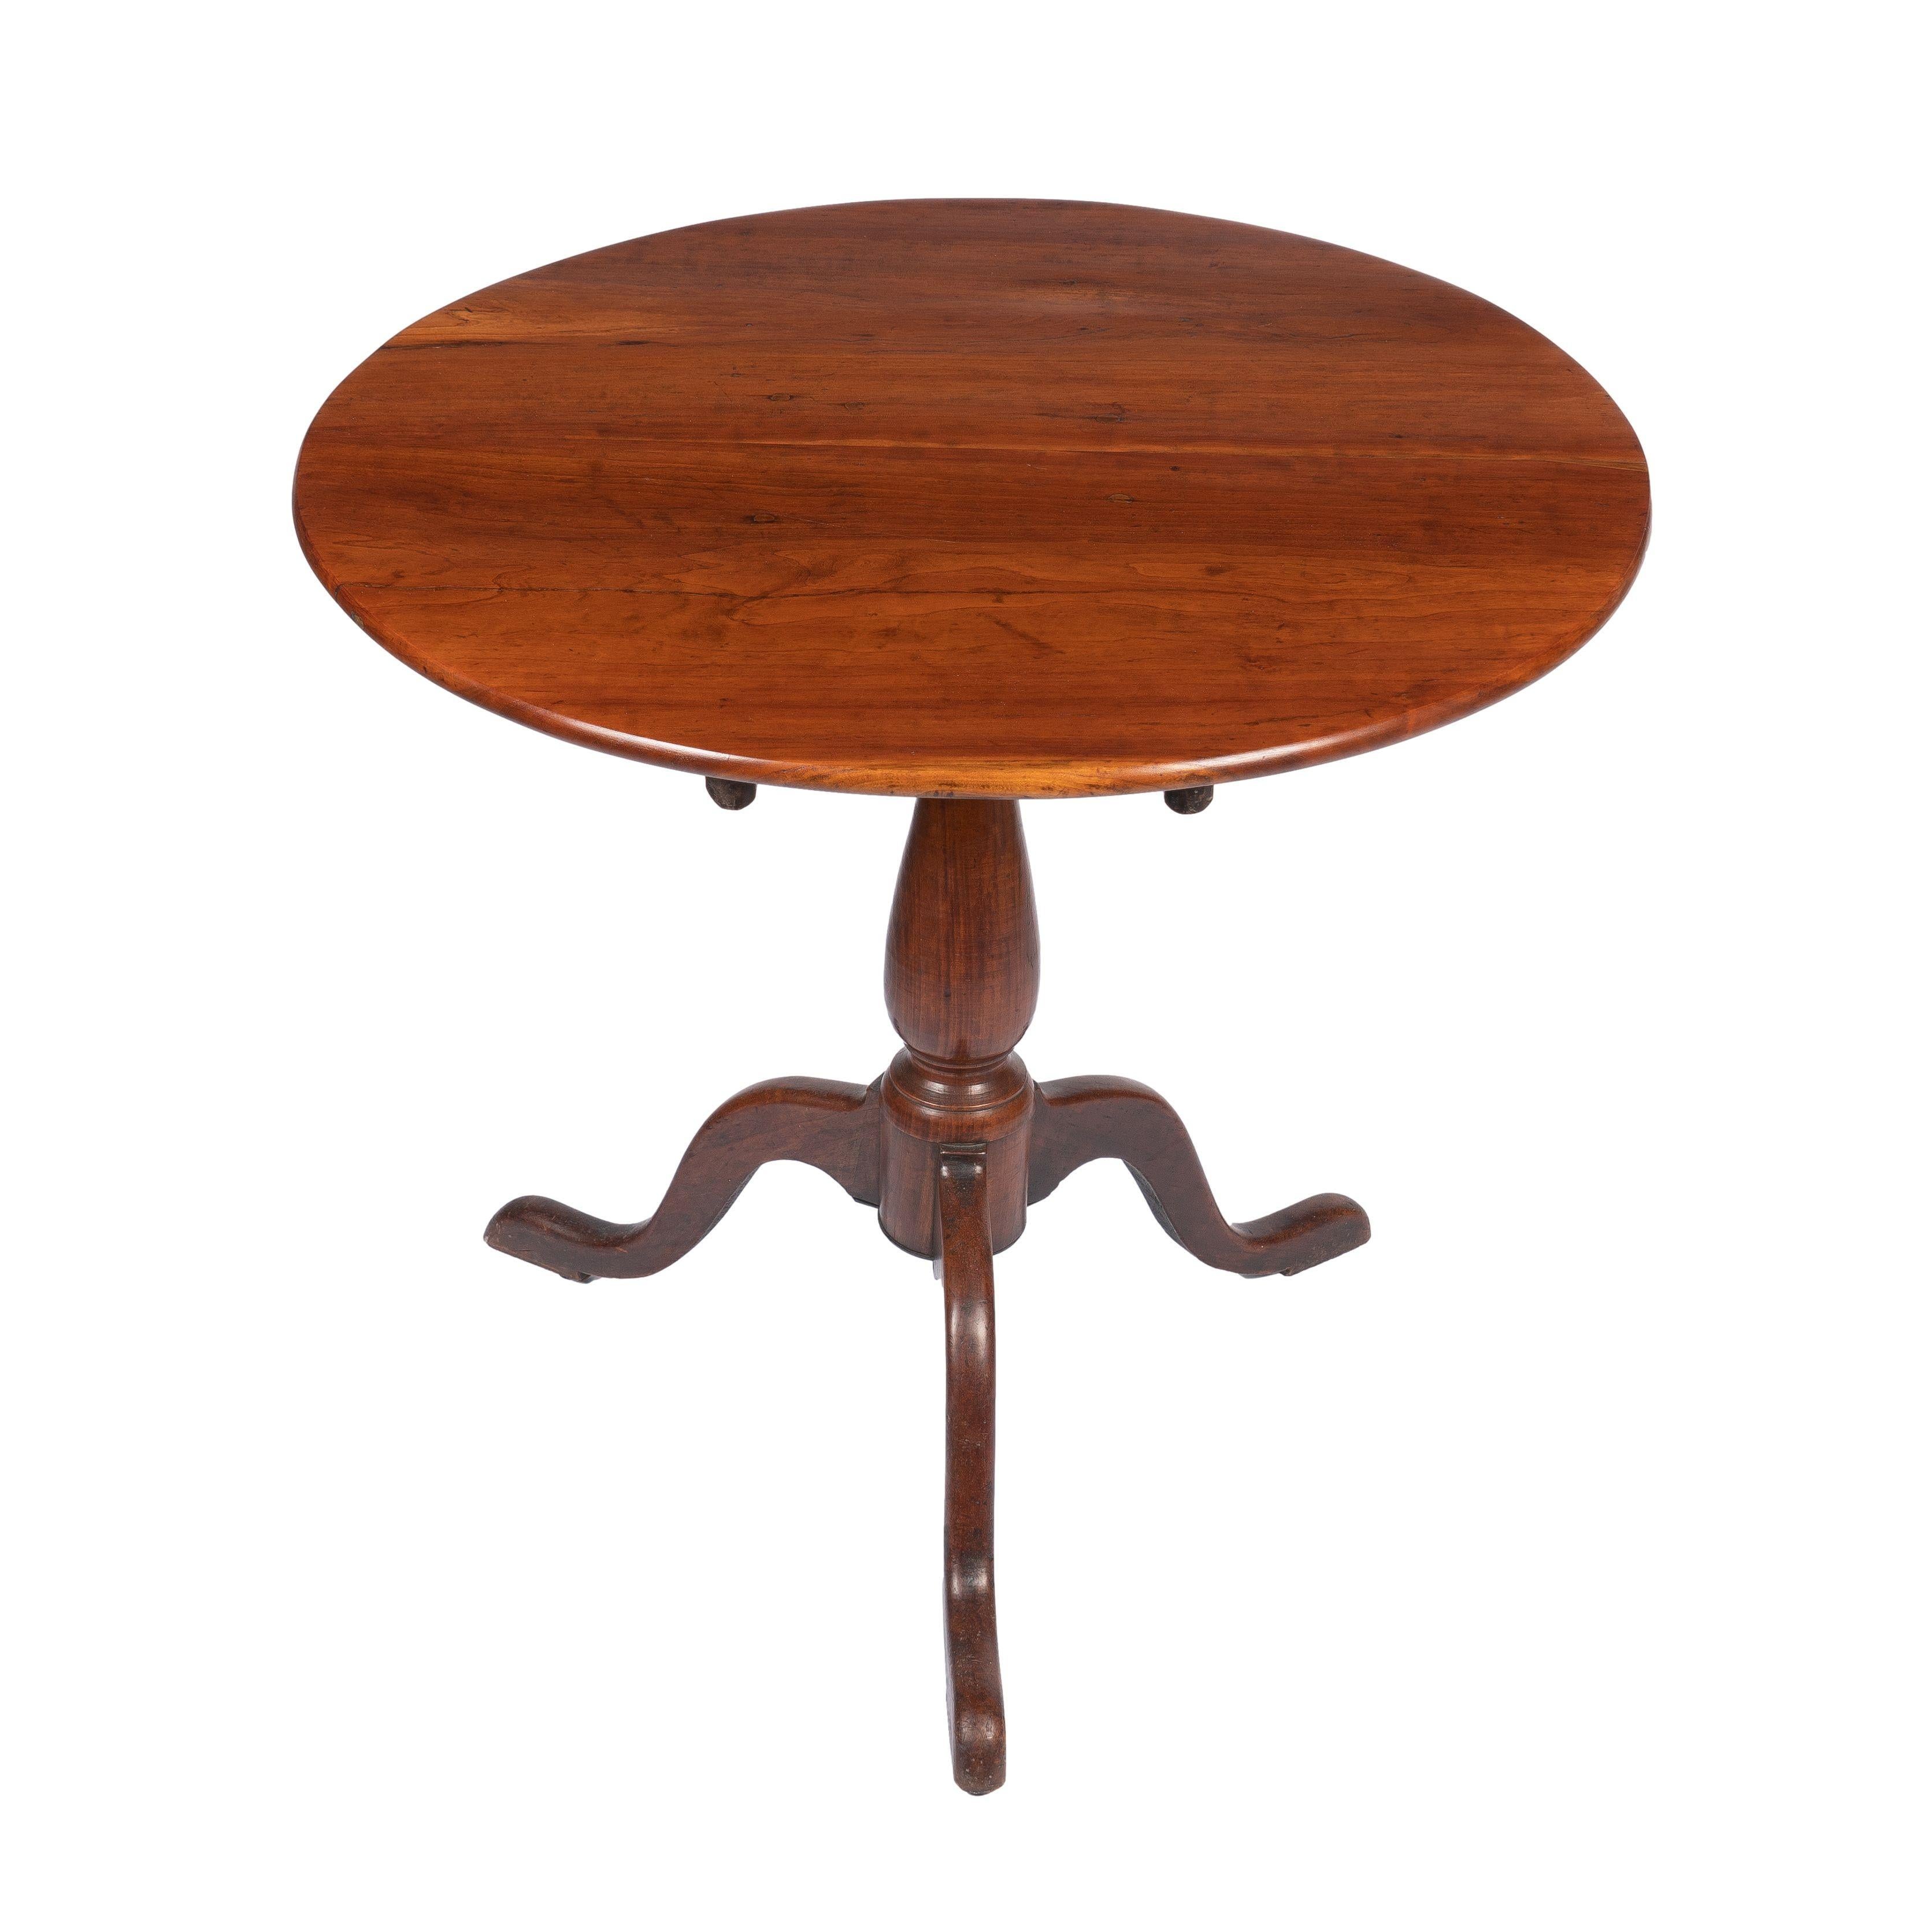 American Chippendale tilt top tea table with a two board cherry wood top. The top rests on a baluster turned pedestal which is supported by arched tripod legs on pad feet.
 
American, Upper Connecticut Valley, 1775-1800.